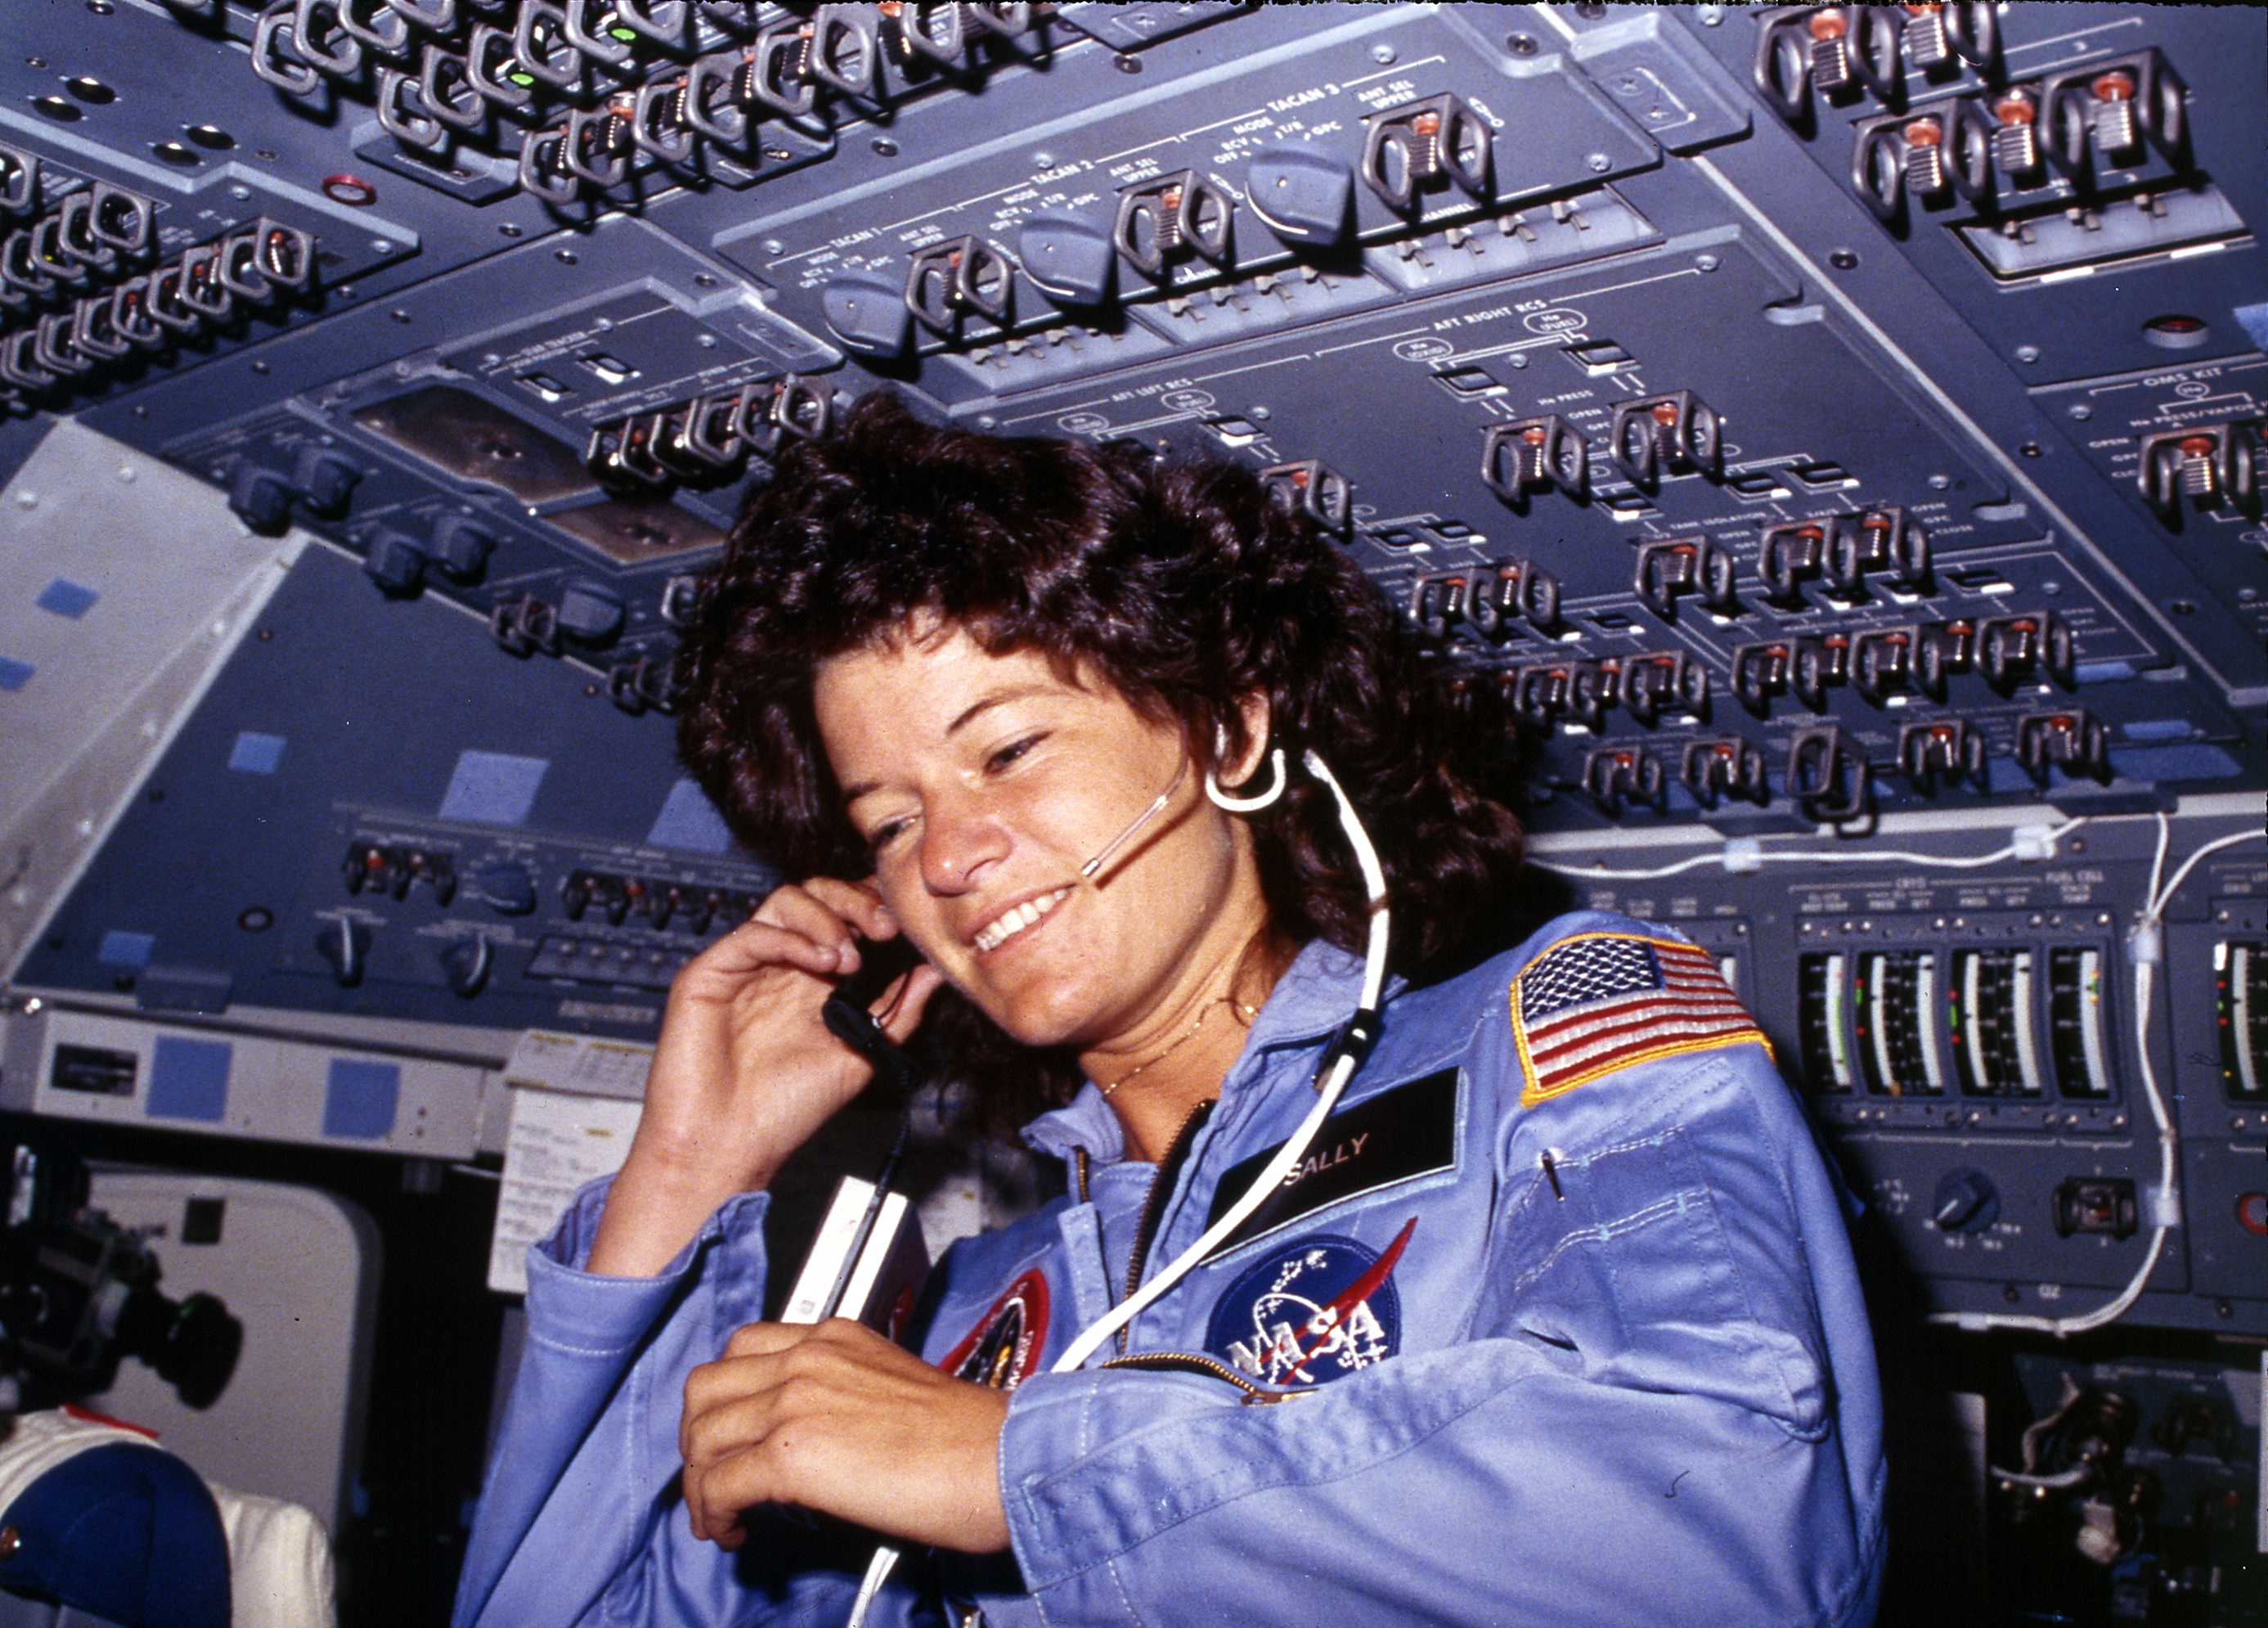 Sally Ride, America's first woman astronaut communitcates with ground controllers from the flight deck - NARA - 541940